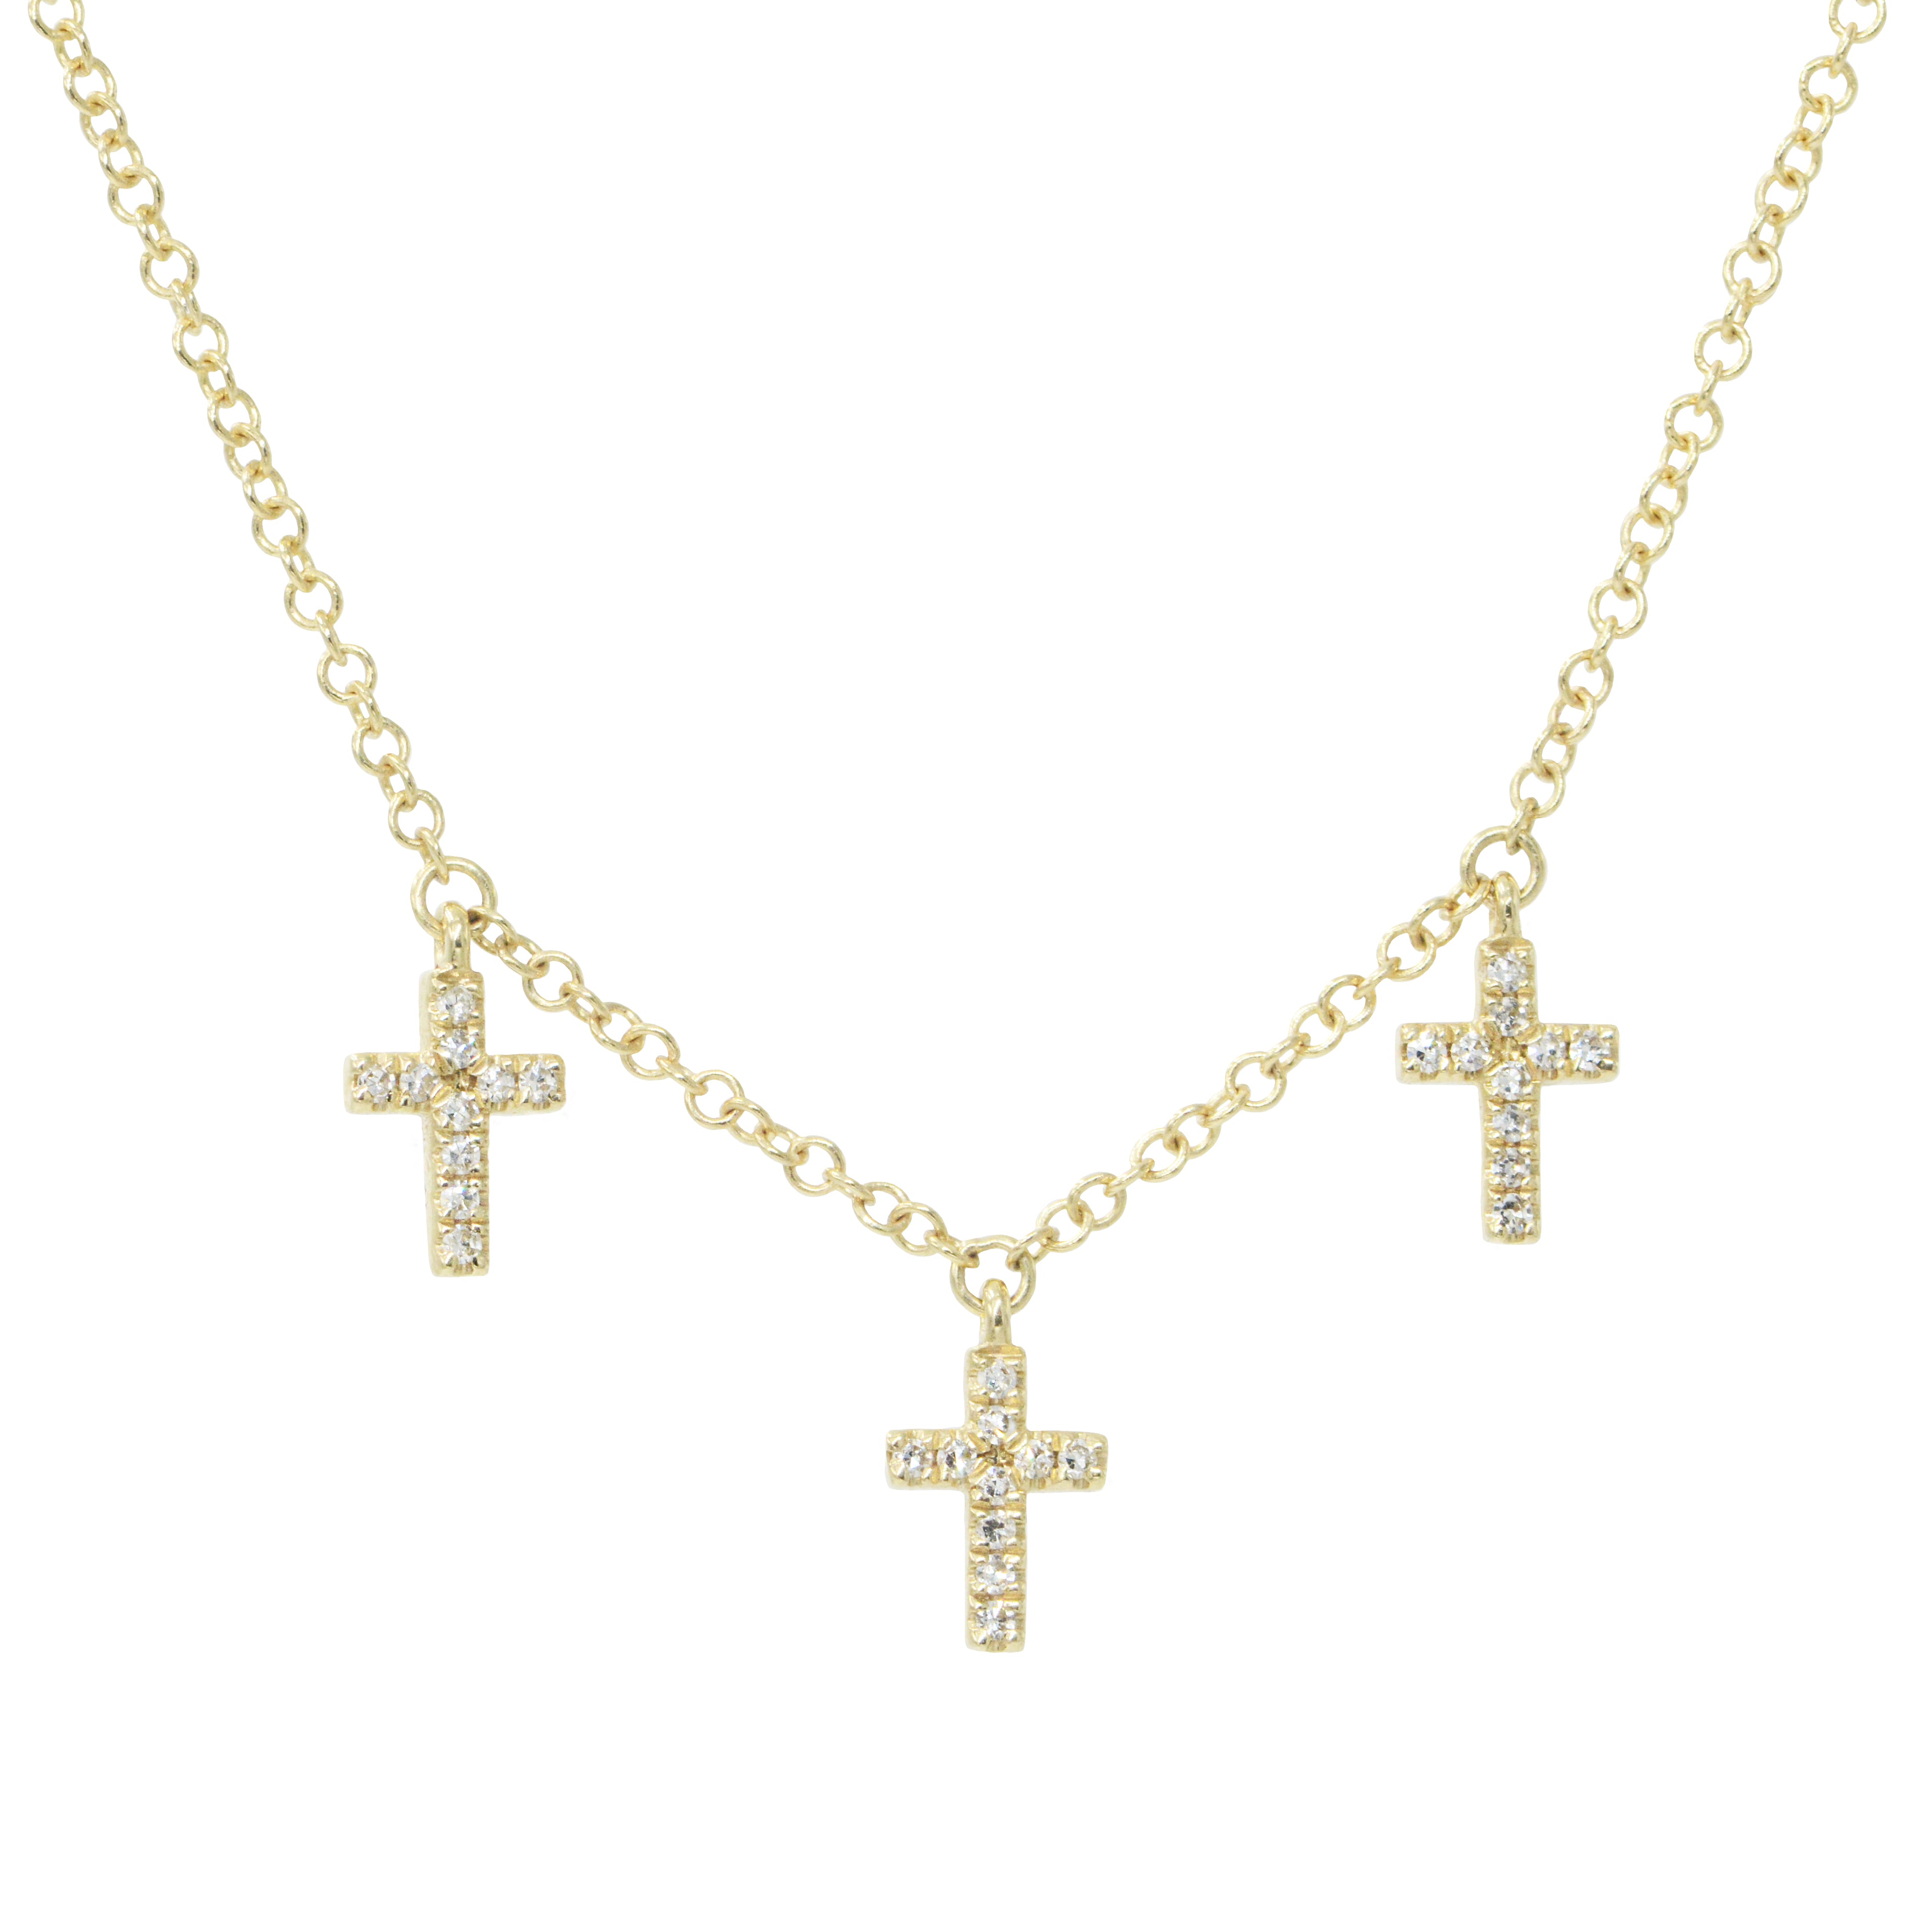 Pearled Cross Diamond Necklace, Black, Yellow Gold, 16.5